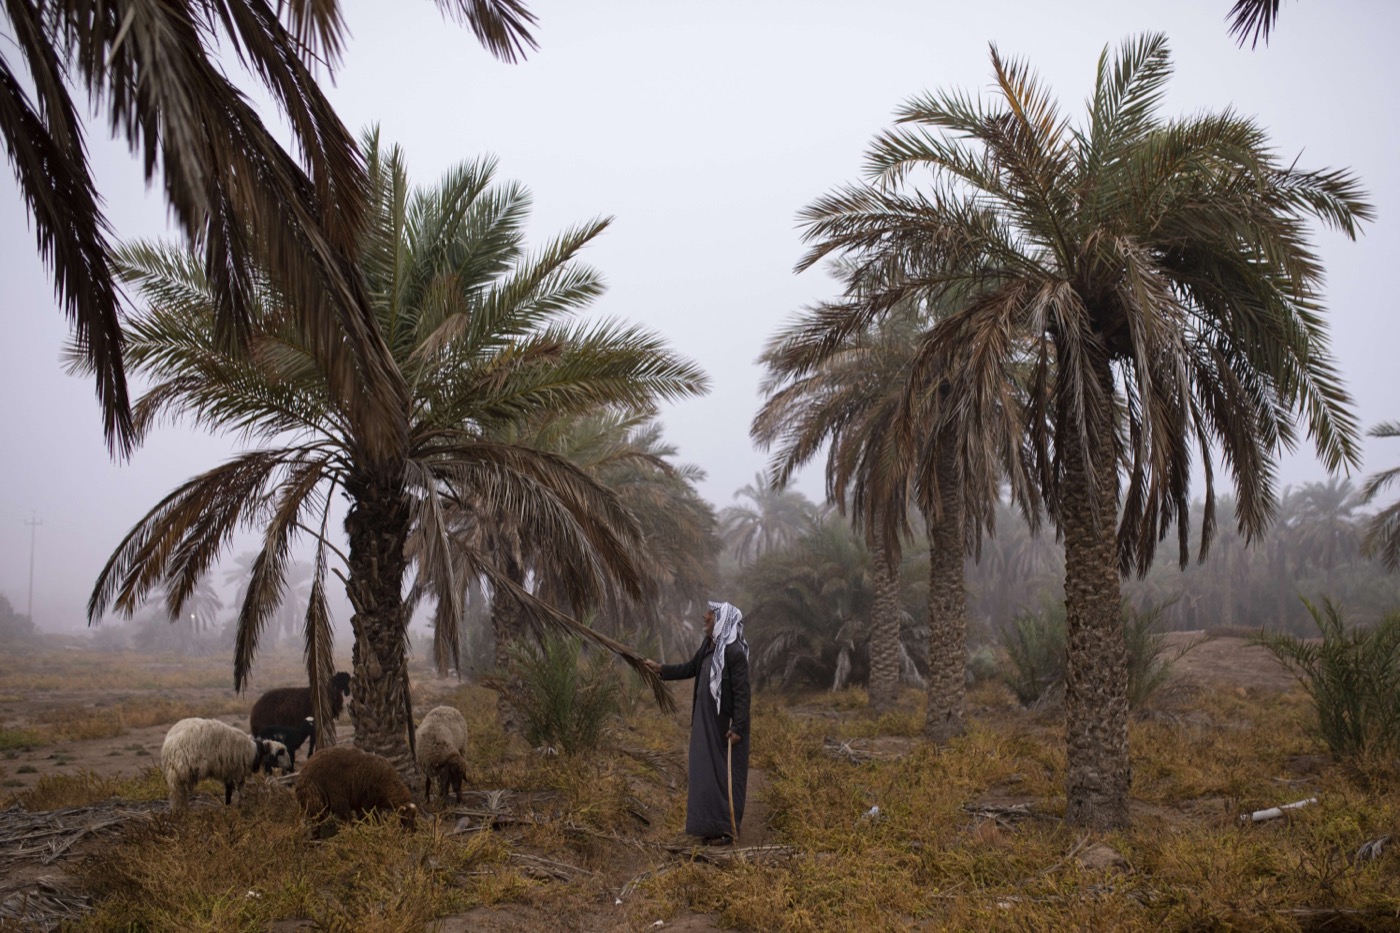 Thi Qar tribal conflicts ‘good for business’ while destroying lives Image